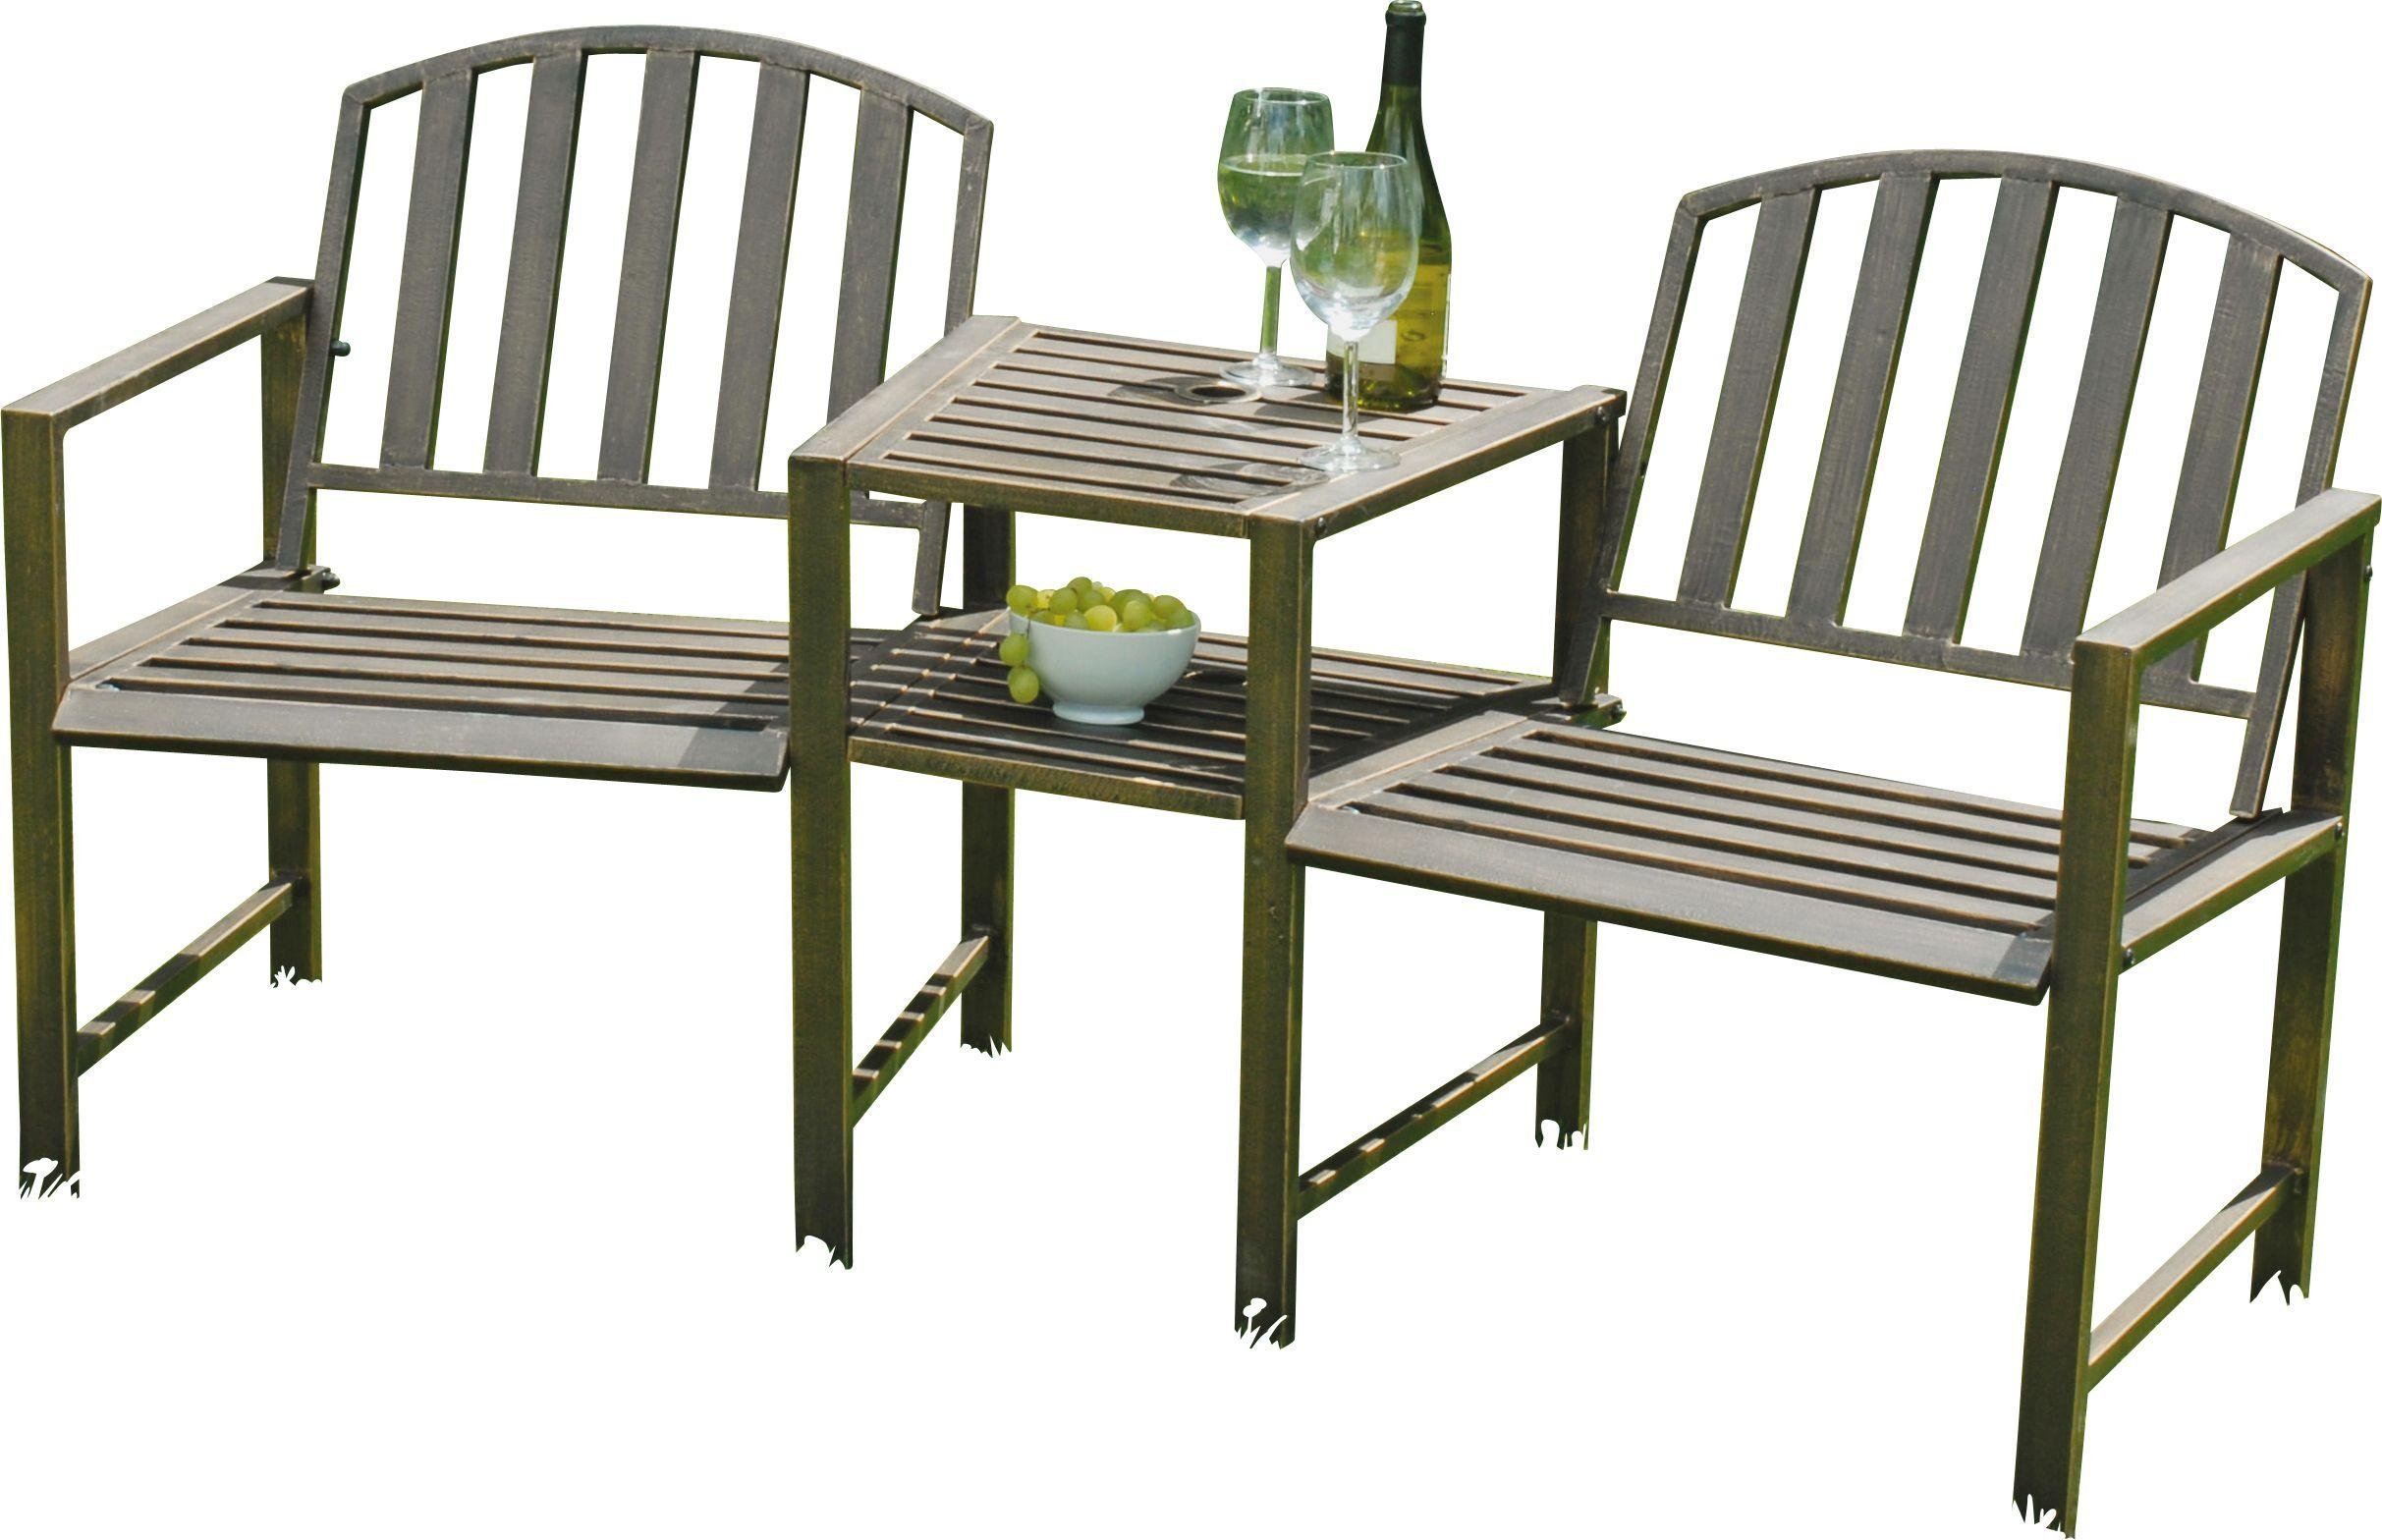 Duo 2 Seater Metal Garden Bench and Table Set